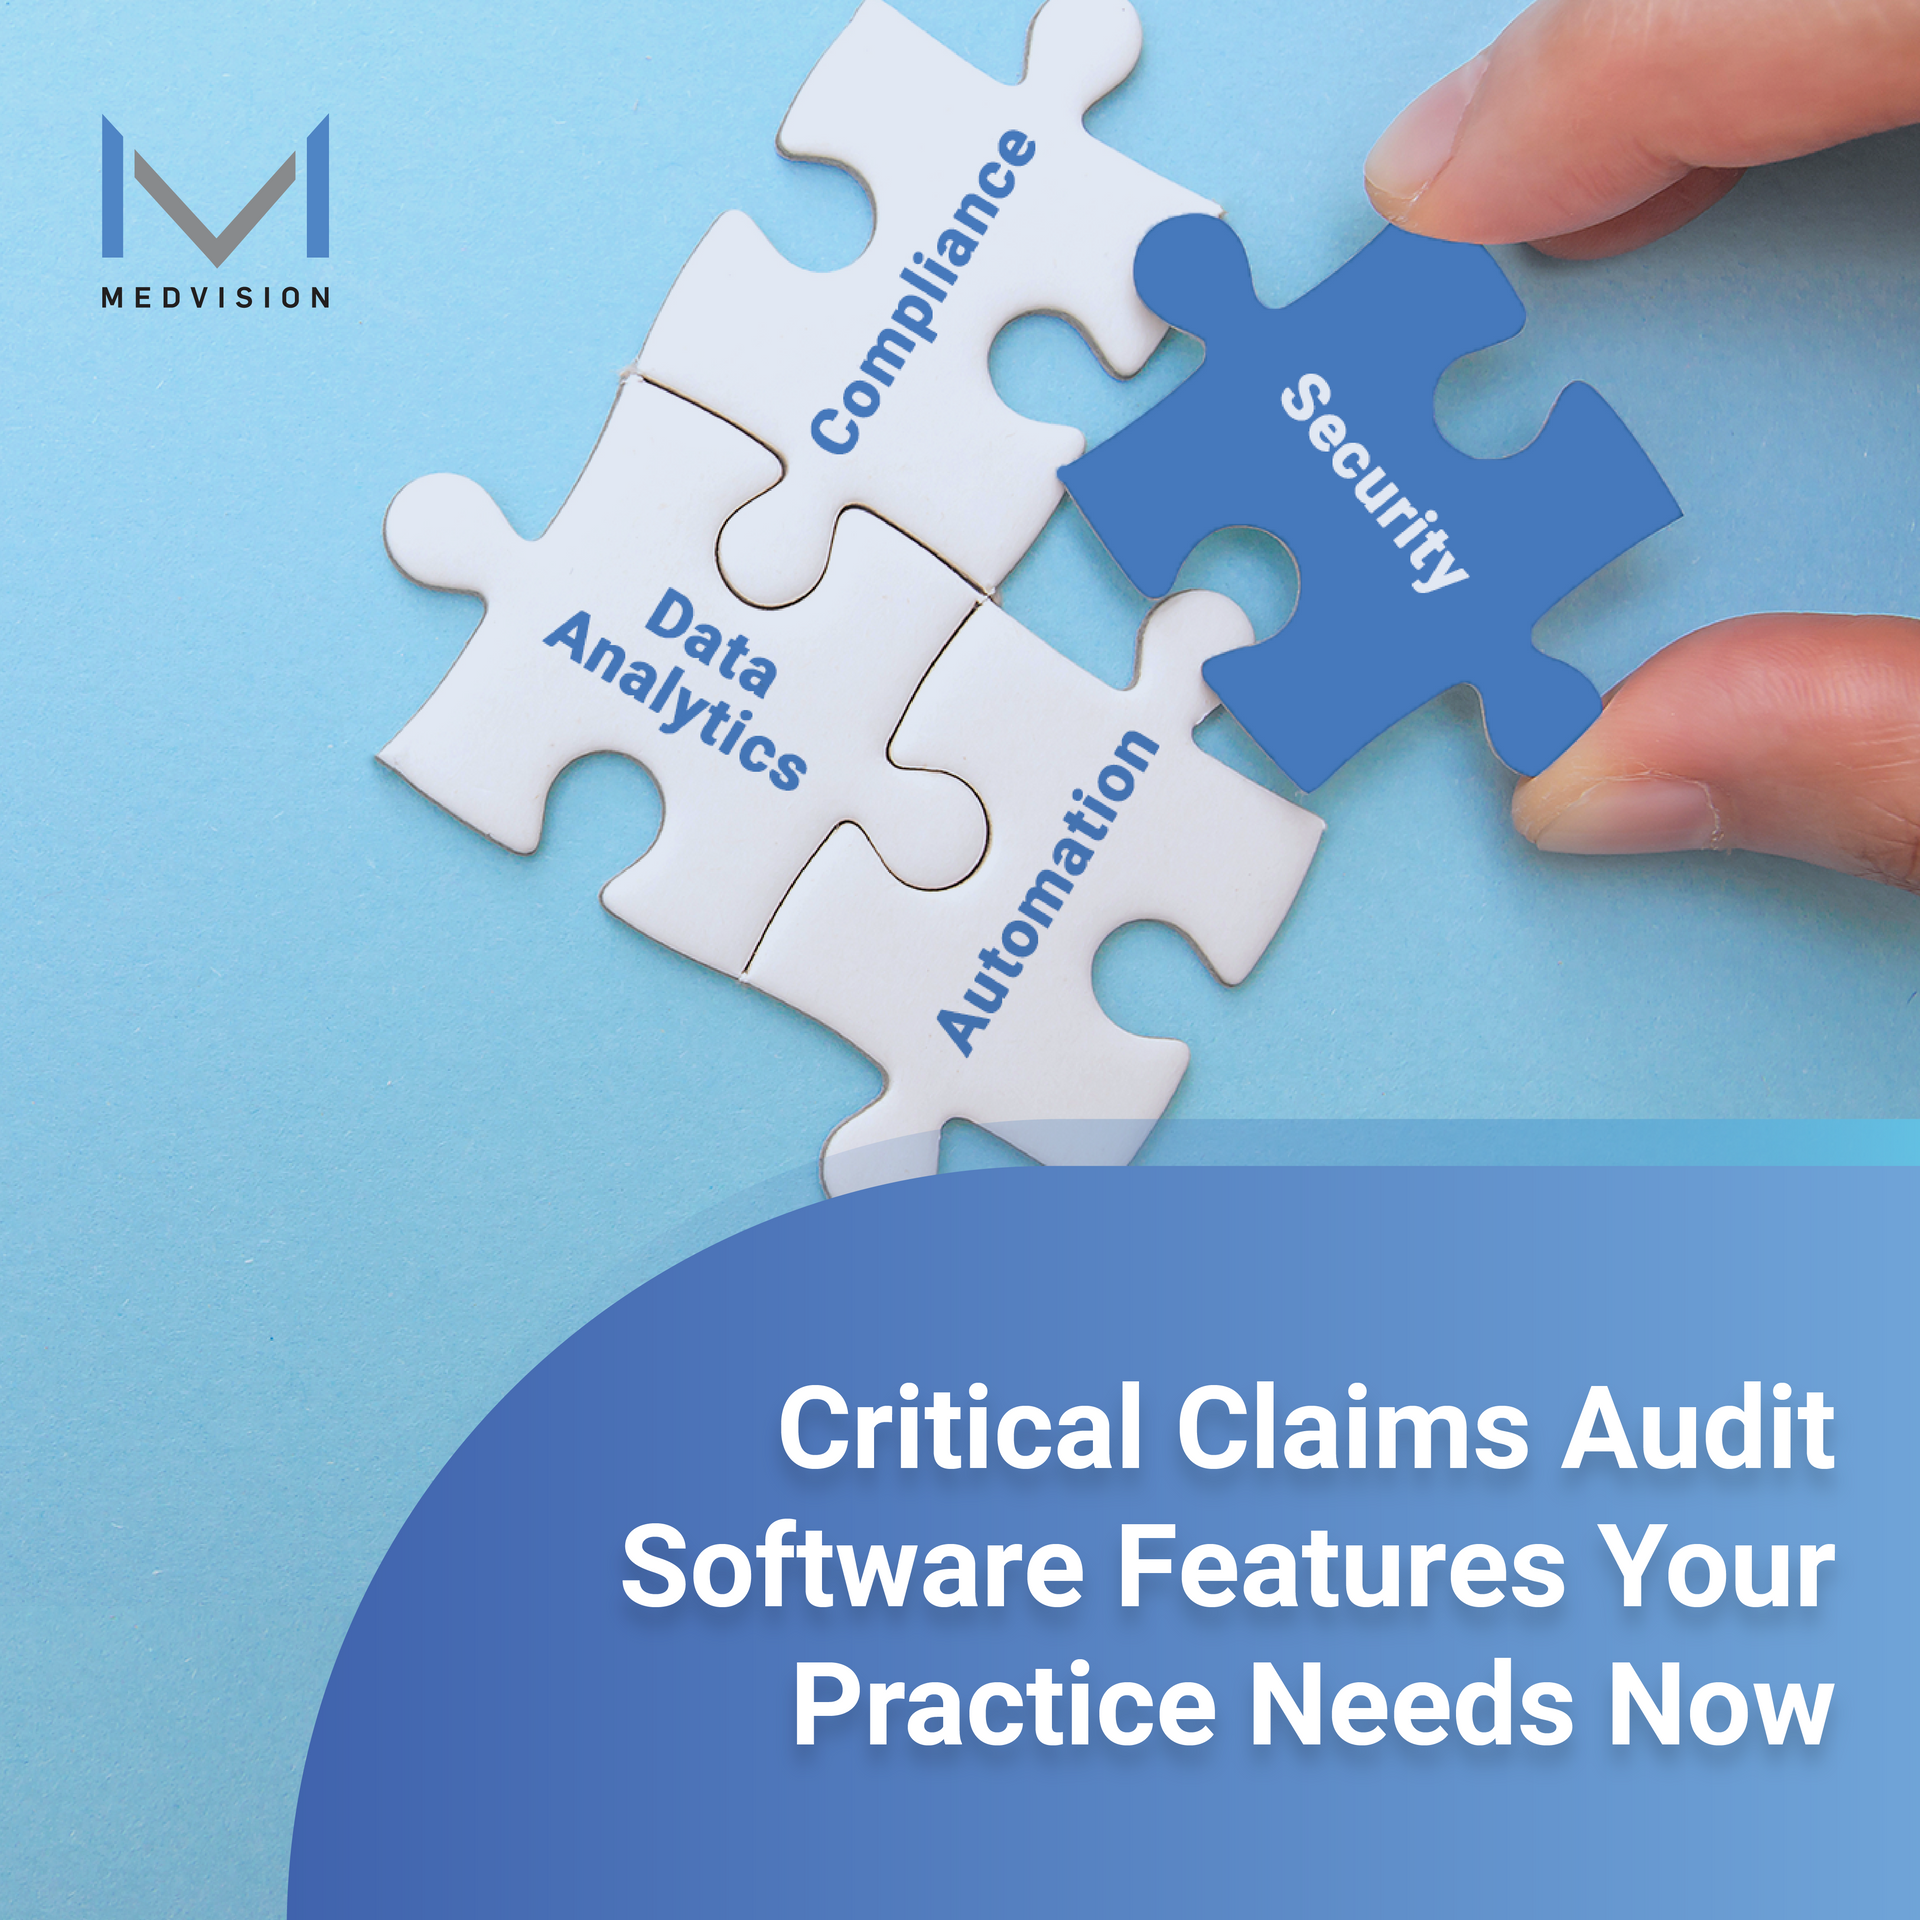 Critical Claims Audit Software Features Your Practice Needs Now